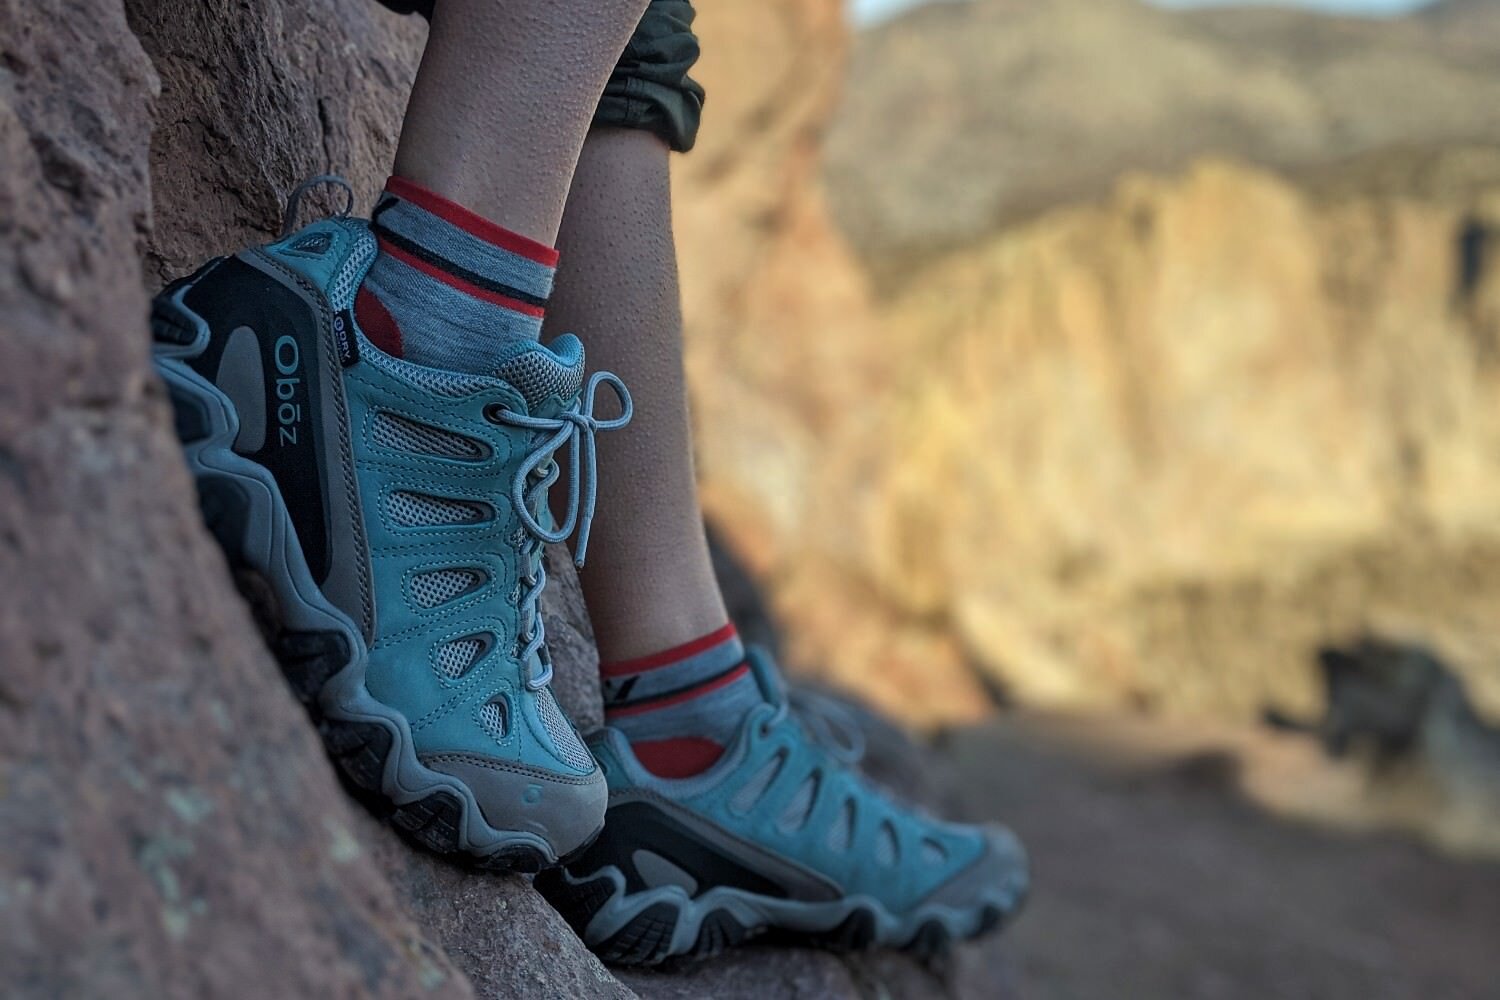 The highly supportive Oboz Sawtooth II Low Hiking Shoes (men’s / women’s) are on sale for 20% off